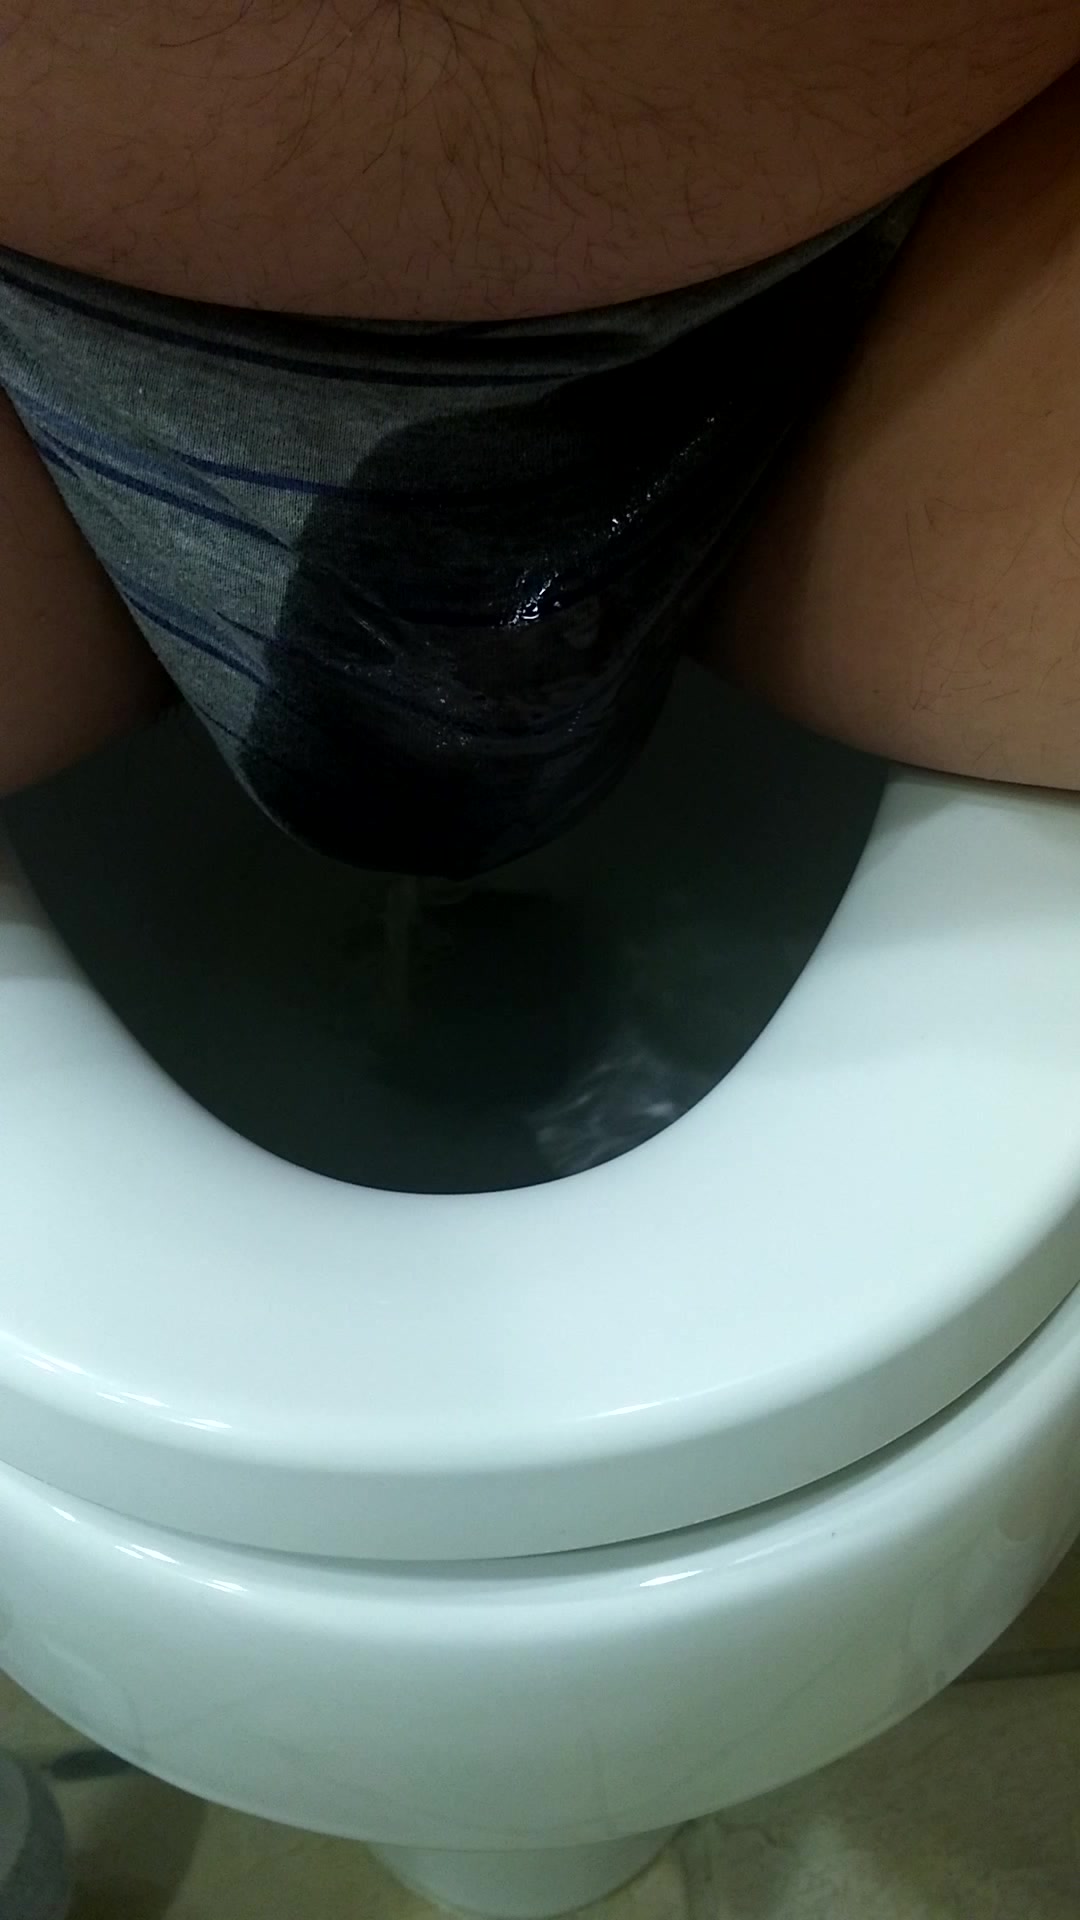 Wetting on the toilet